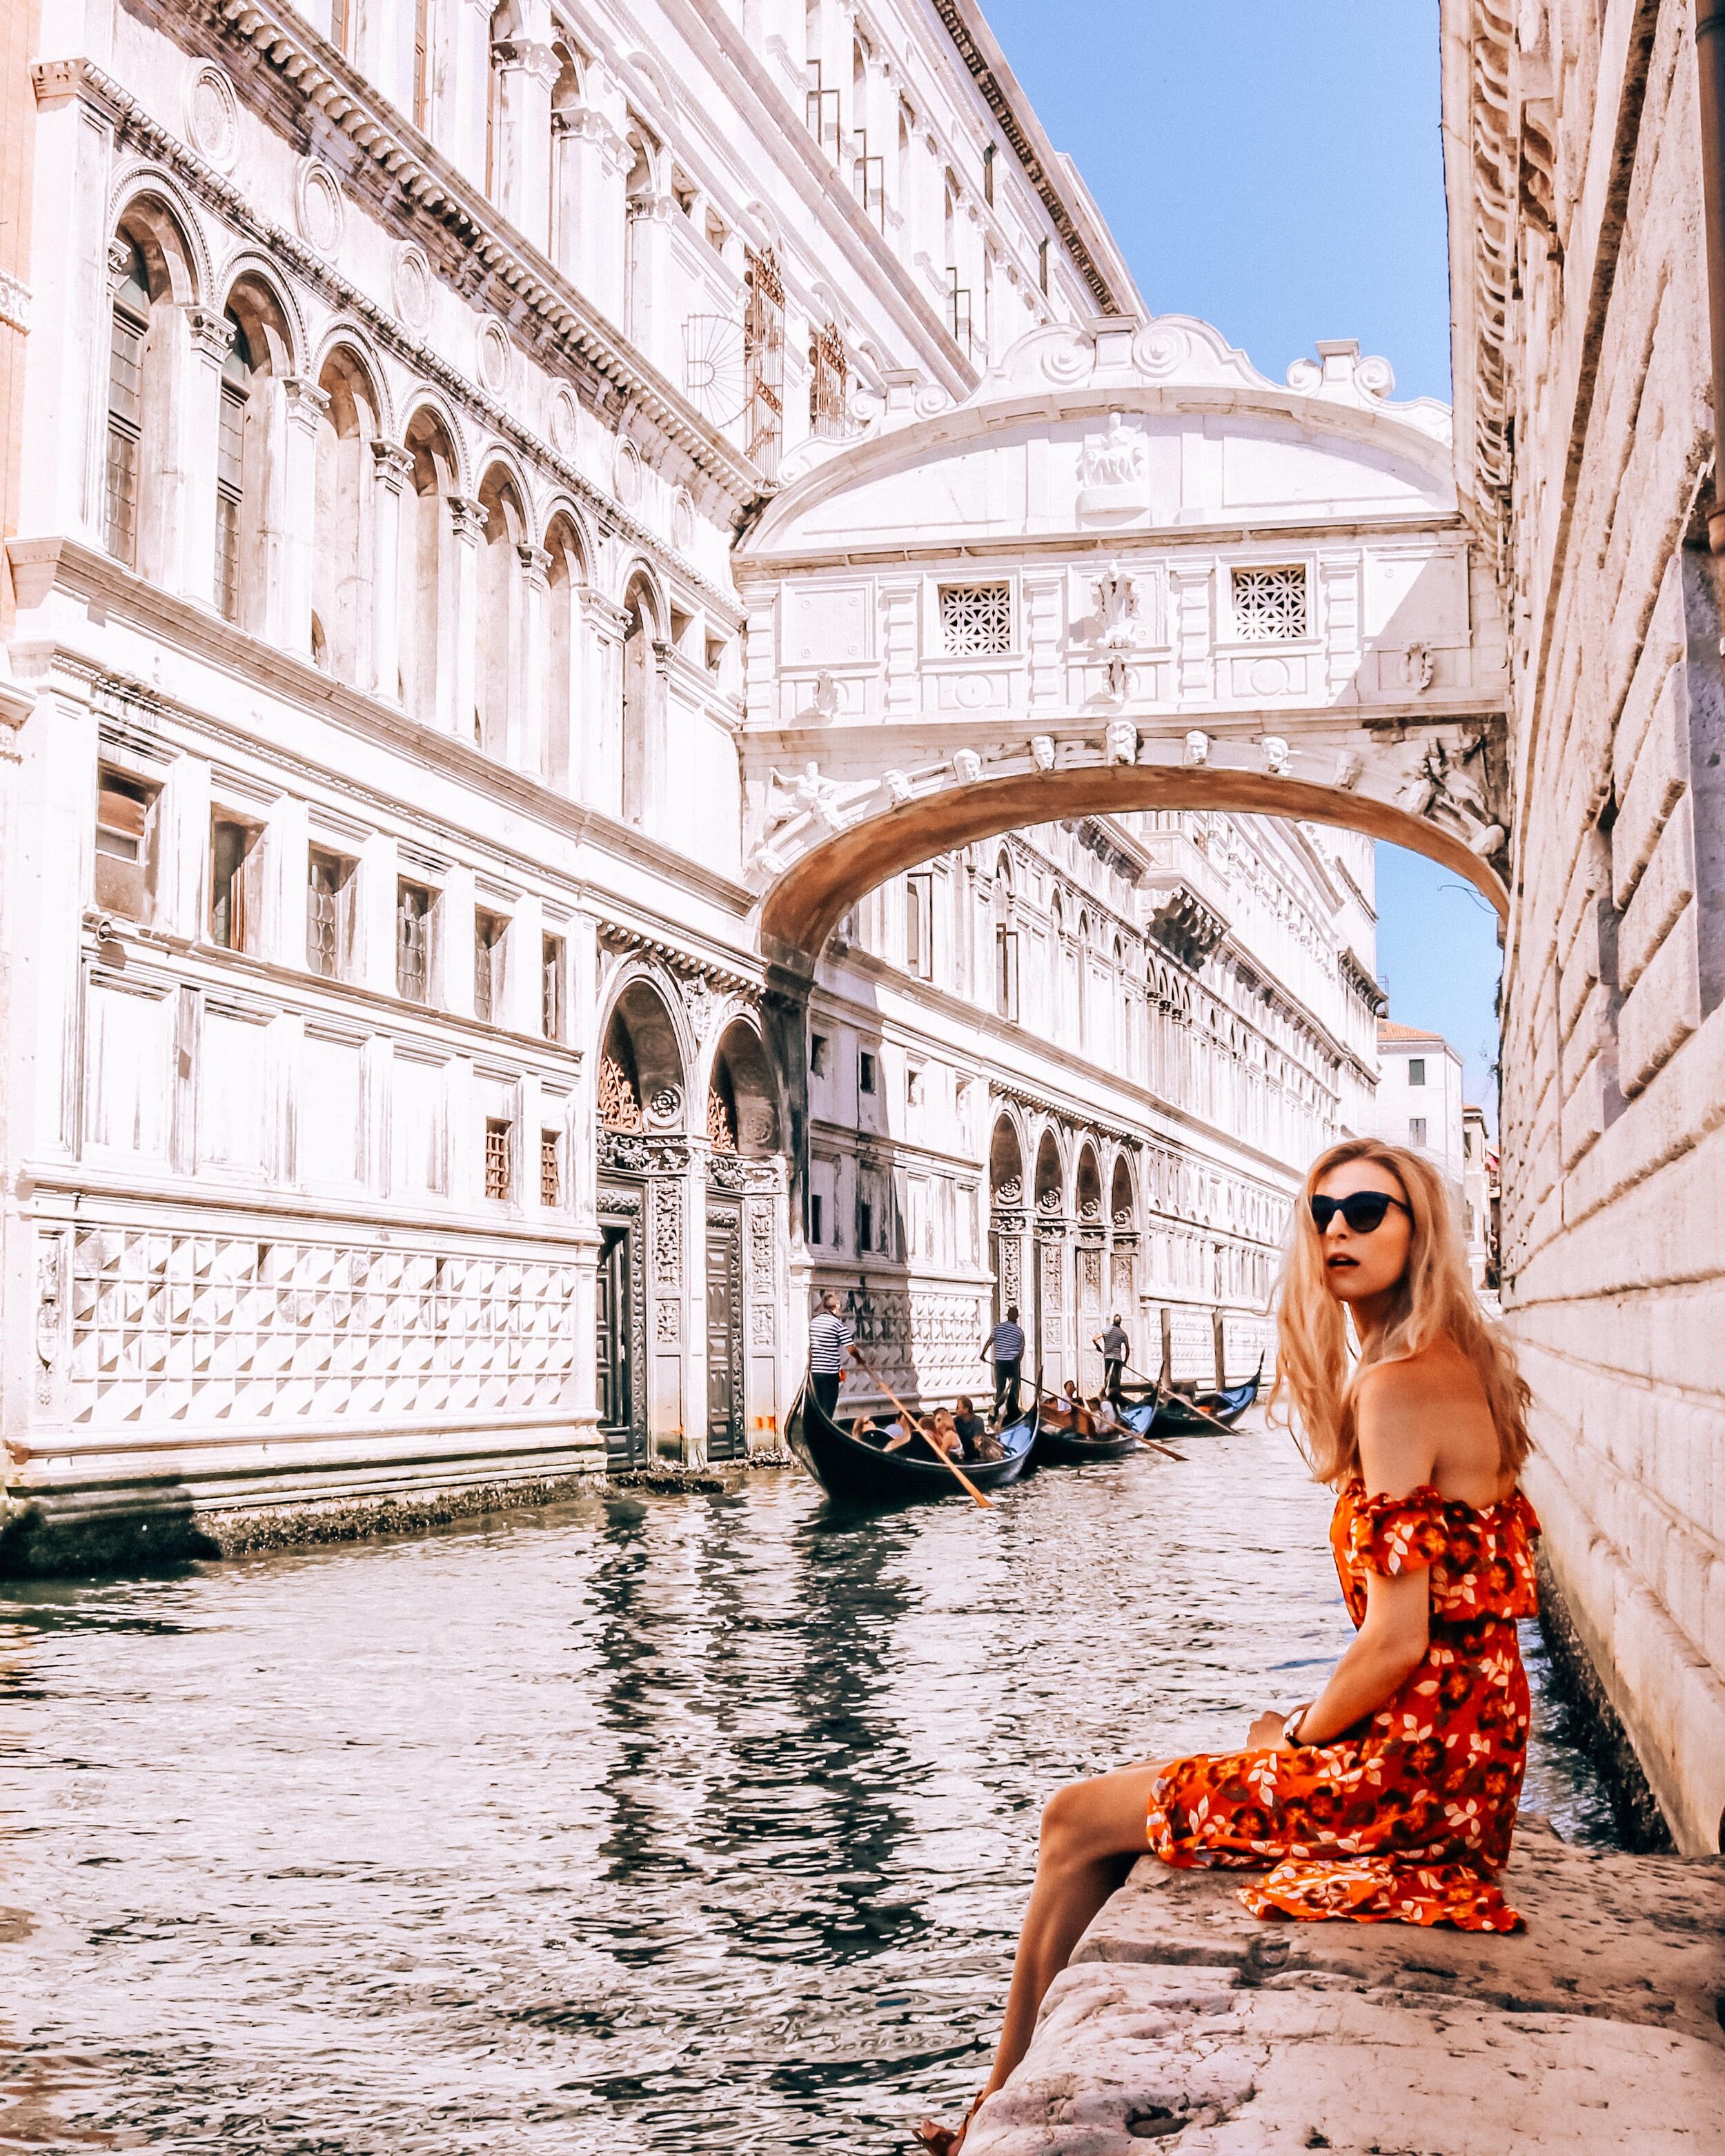 Where to find the best views in Venice | best places for panoramas, aerial views, iconic Venice photo locations | trip to Venice | Venice Instagram locations | Venice travel photography | Helena Bradbury travel blog | venice guide | Venice Italy pho…